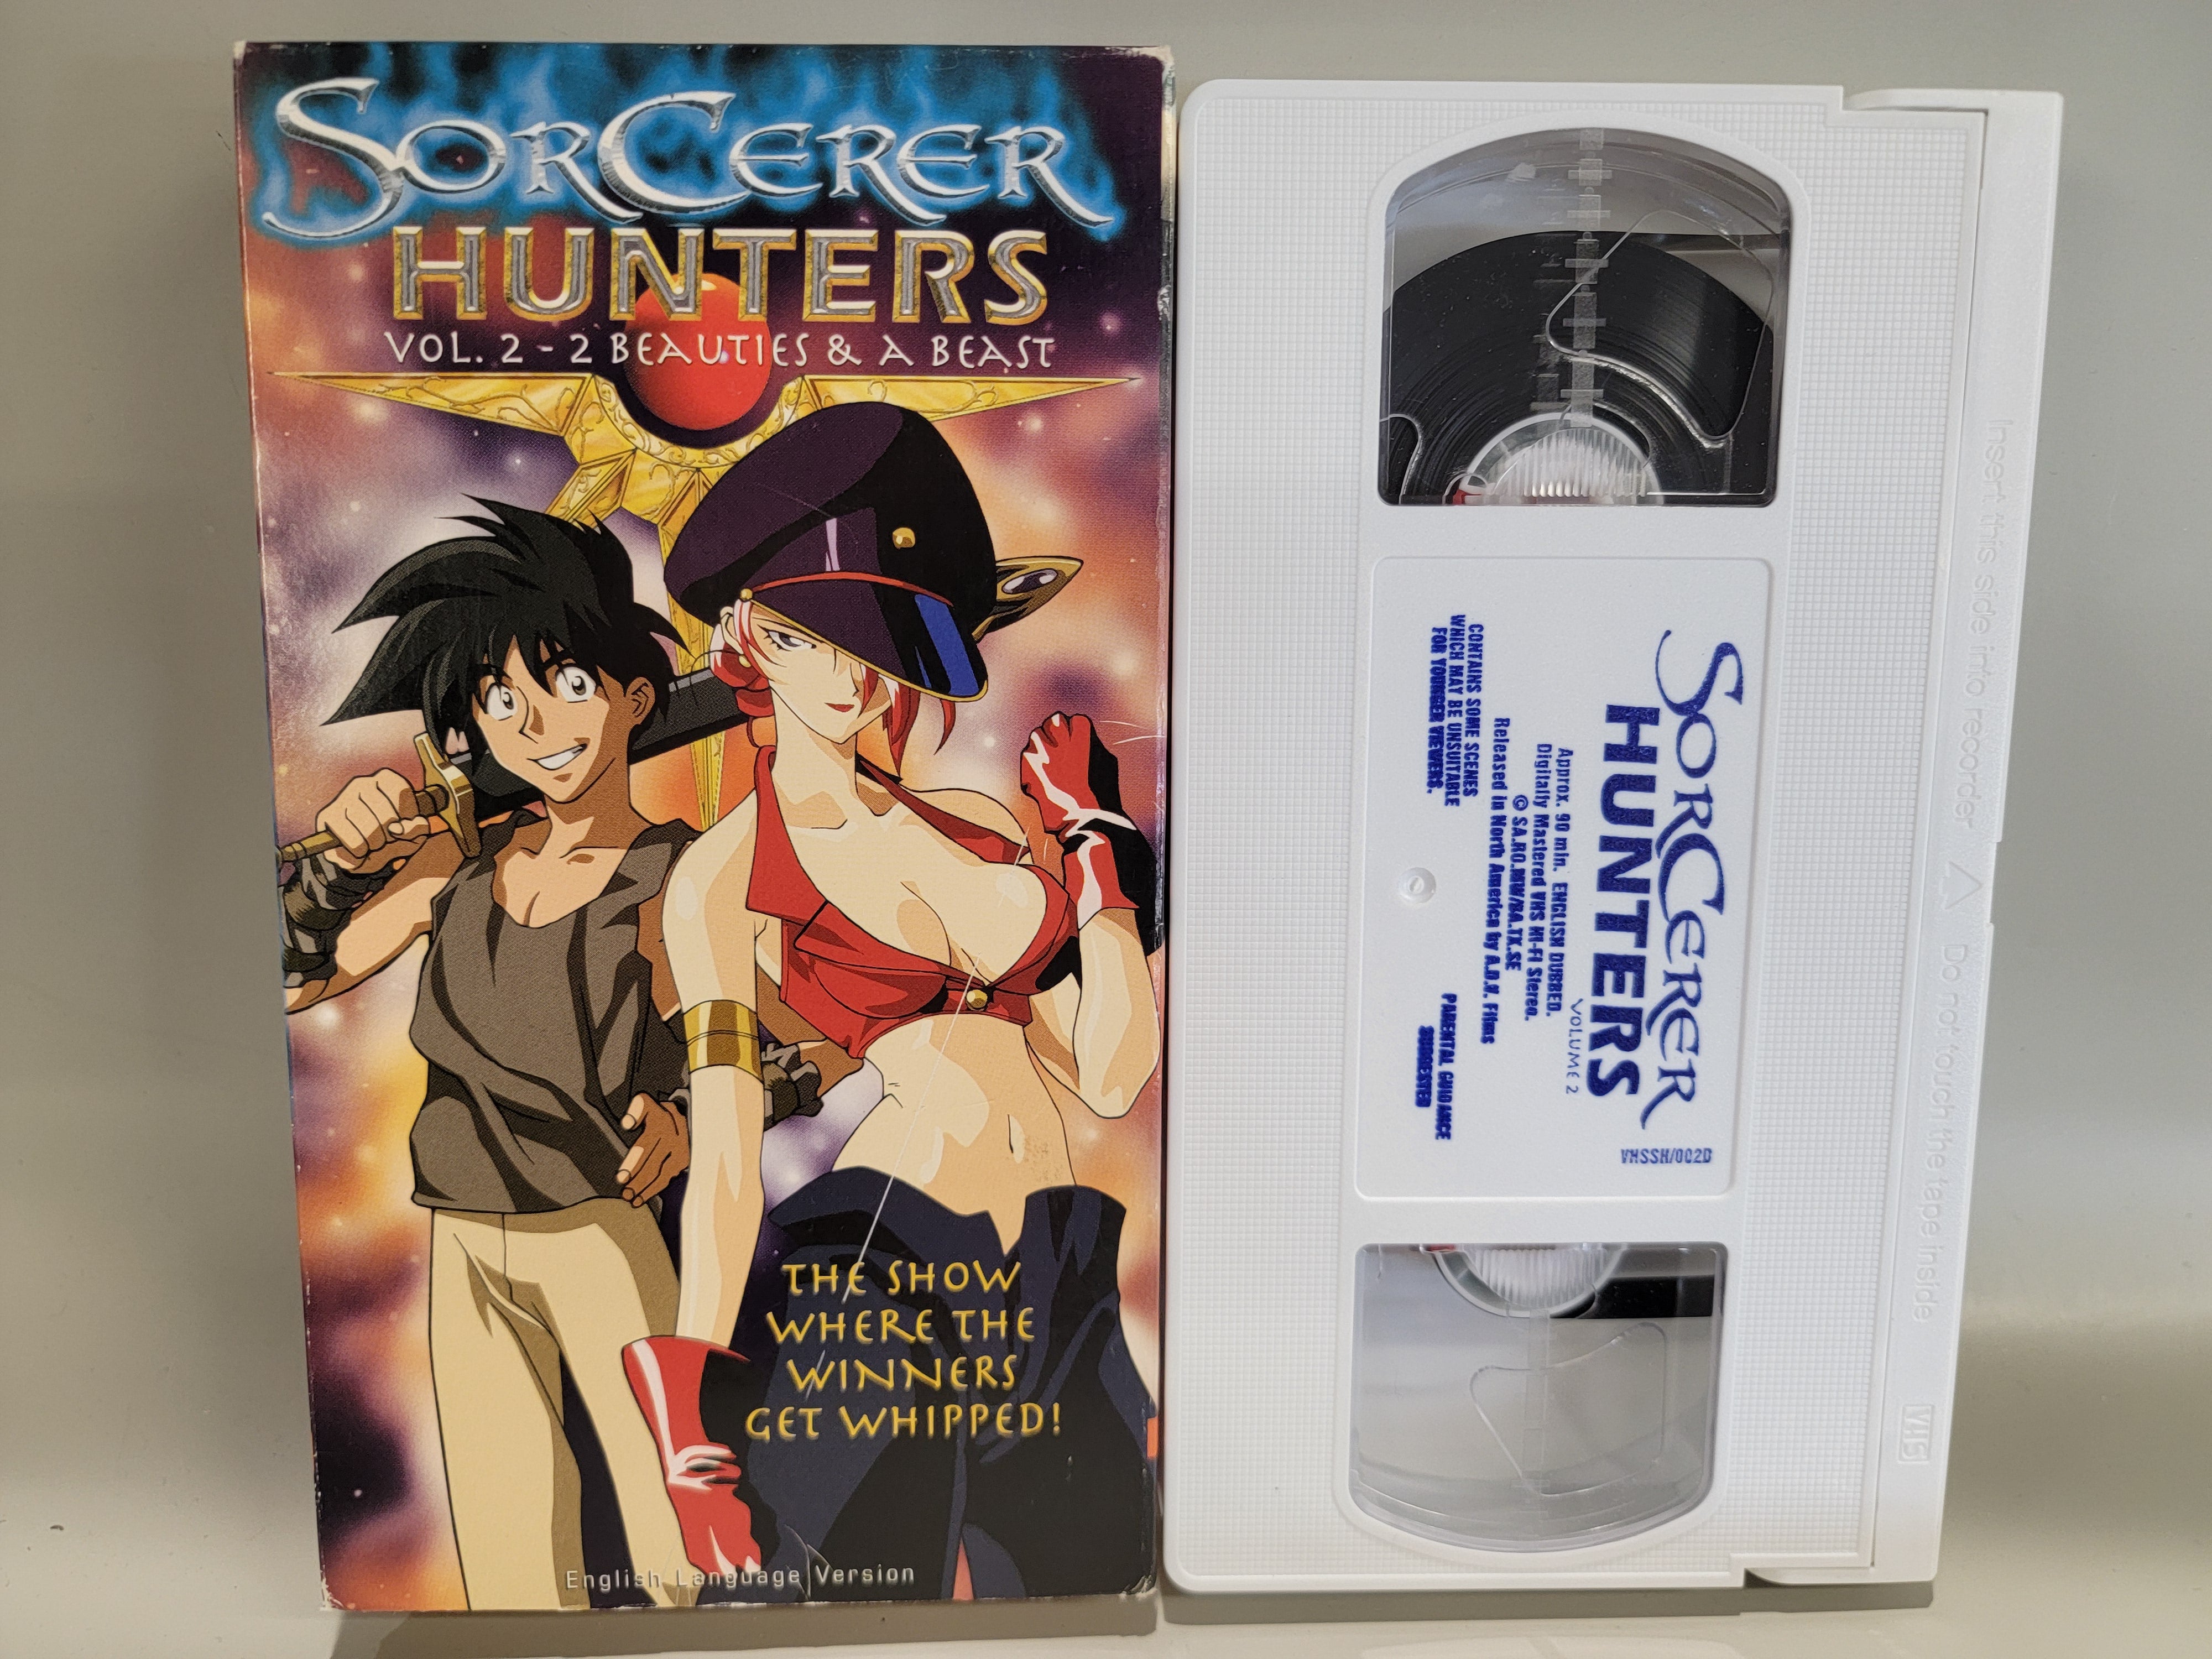 SORCERER HUNTERS VOLUME 2: 2 BEAUTIES AND A BEAST VHS [USED]